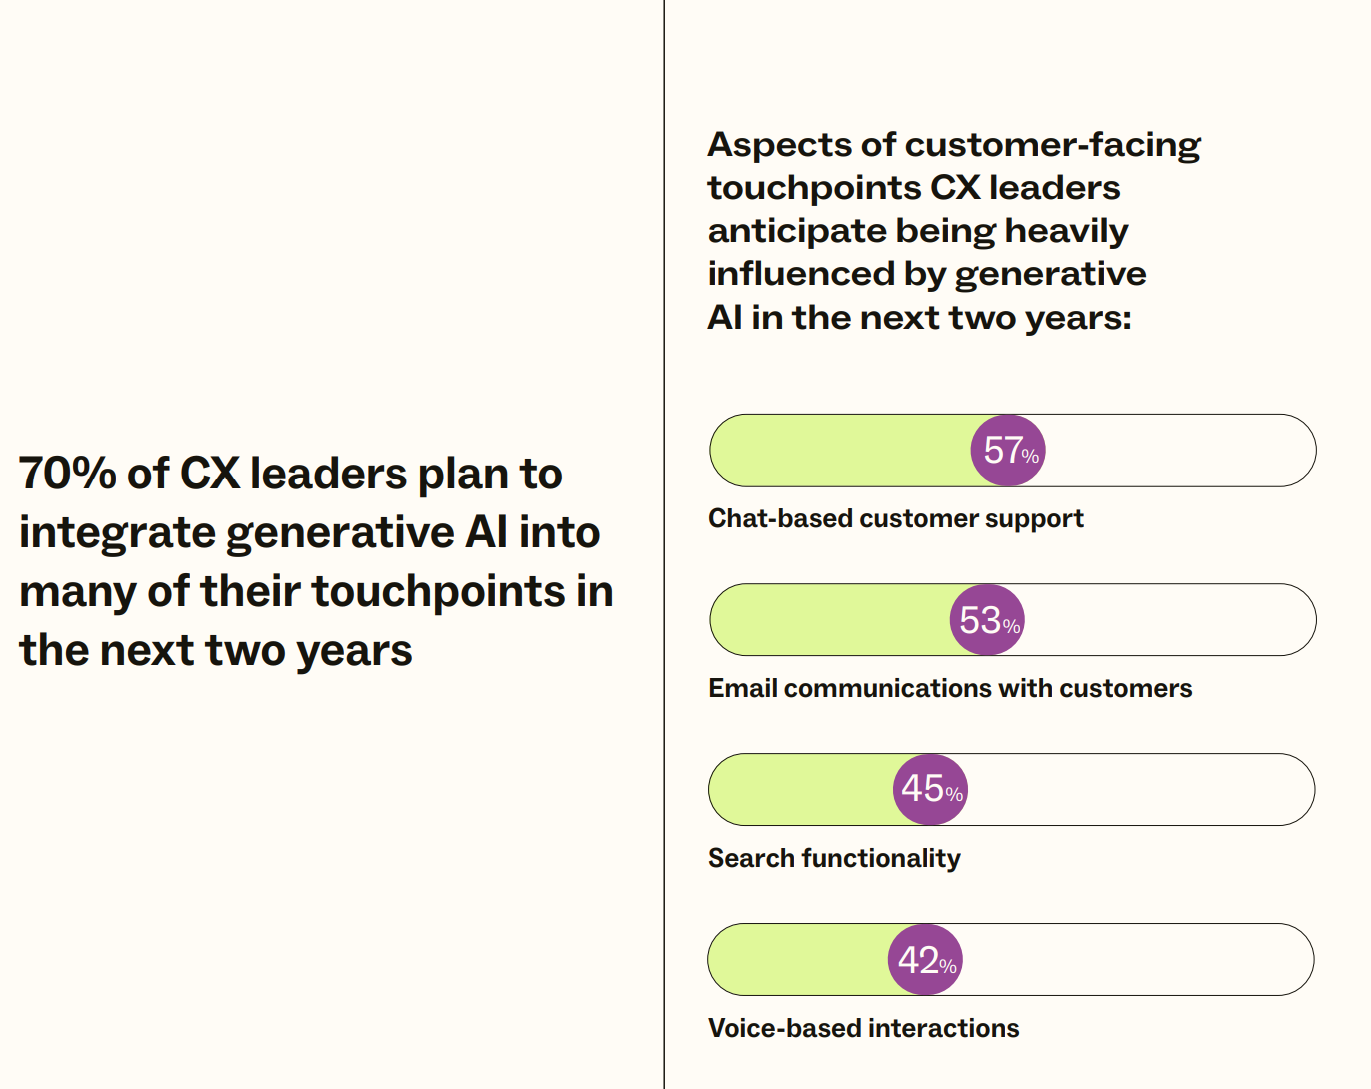 CX touchpoints CX leaders think will be heavily influenced by AI